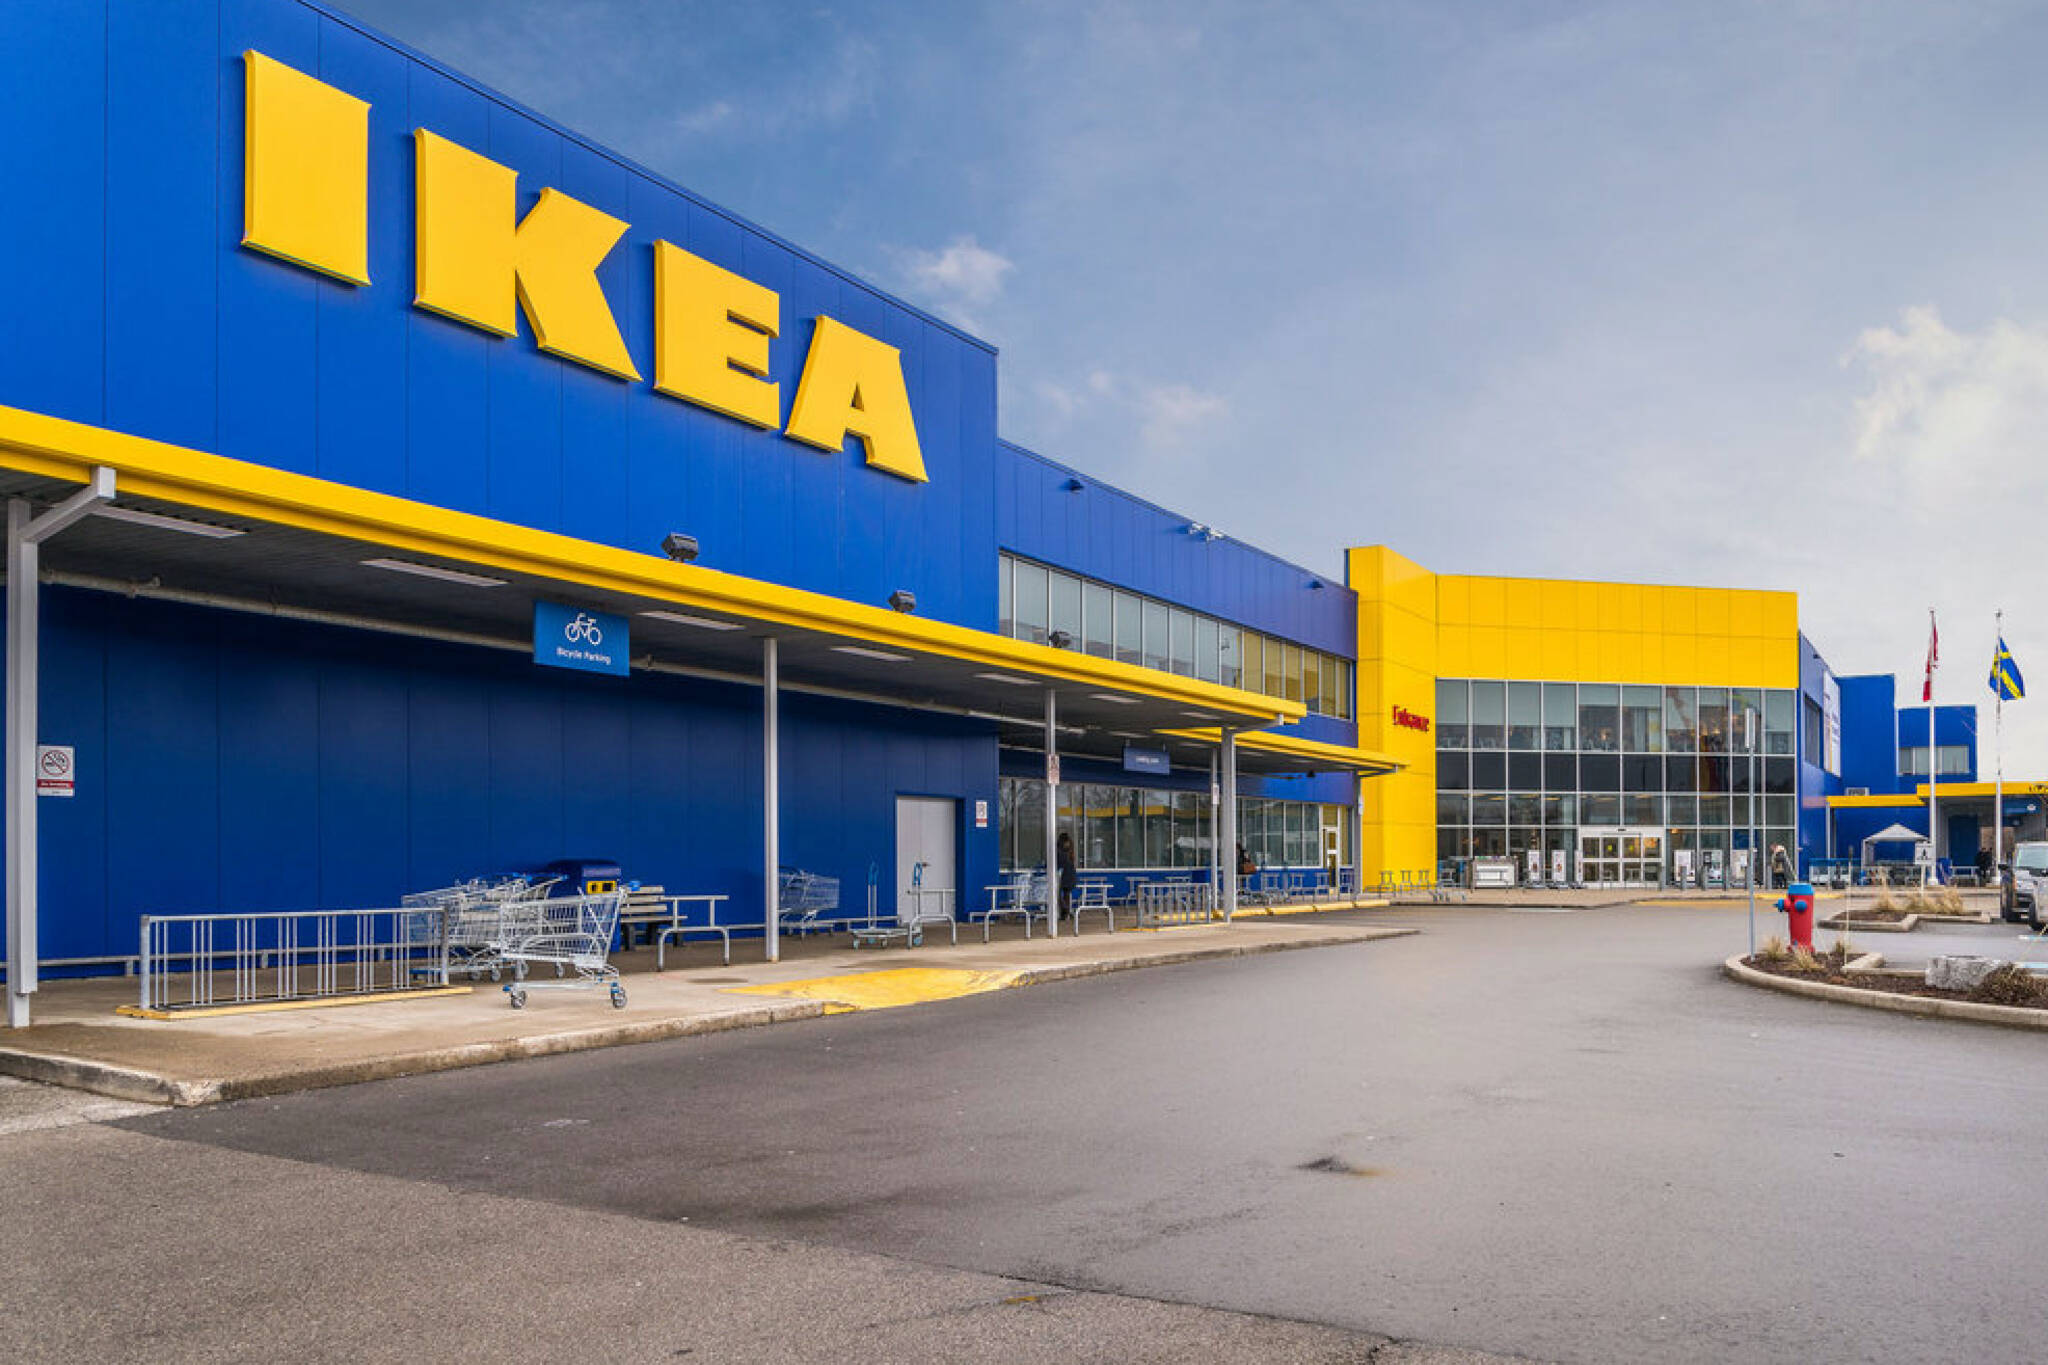 2020526 Ikea Open Toronto 3 ?w=2048&cmd=resize Then Crop&height=1365&quality=70